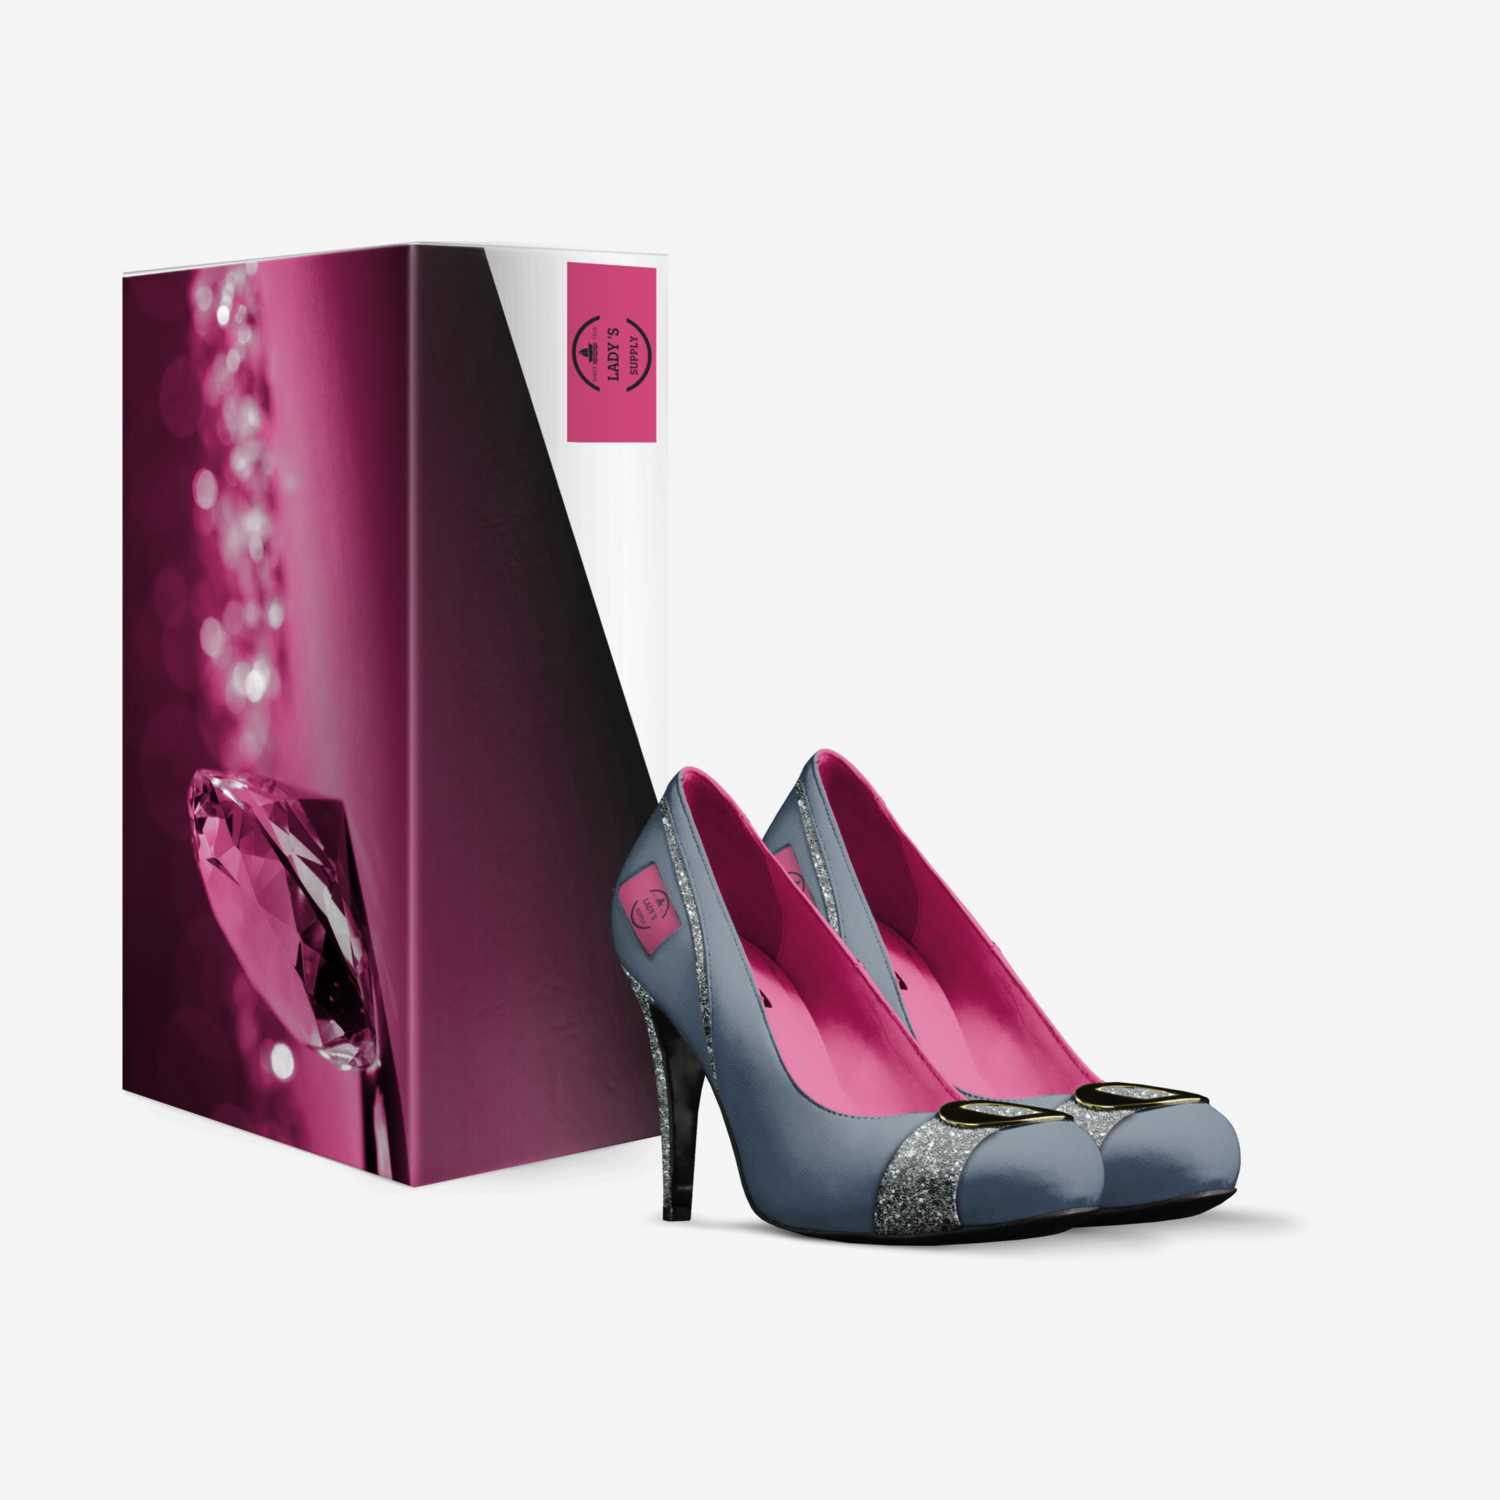 LADY 'S custom made in Italy shoes by Carl Lowe | Box view